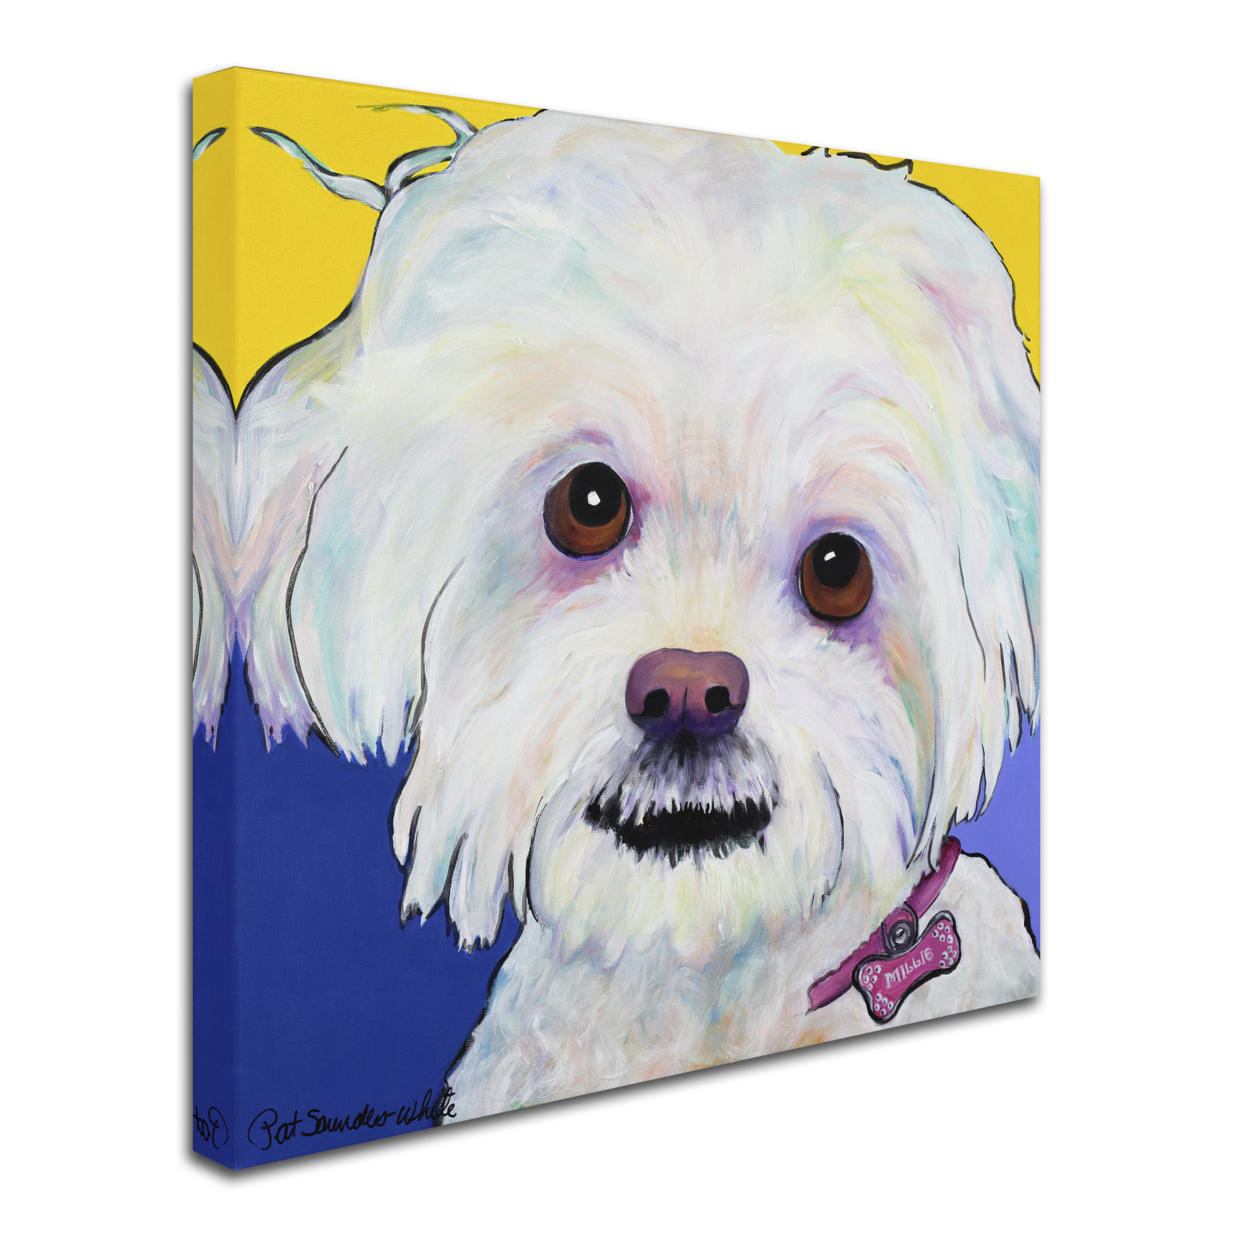 Pat Saunders-White 'Lucy' Huge Canvas Art 35 X 35